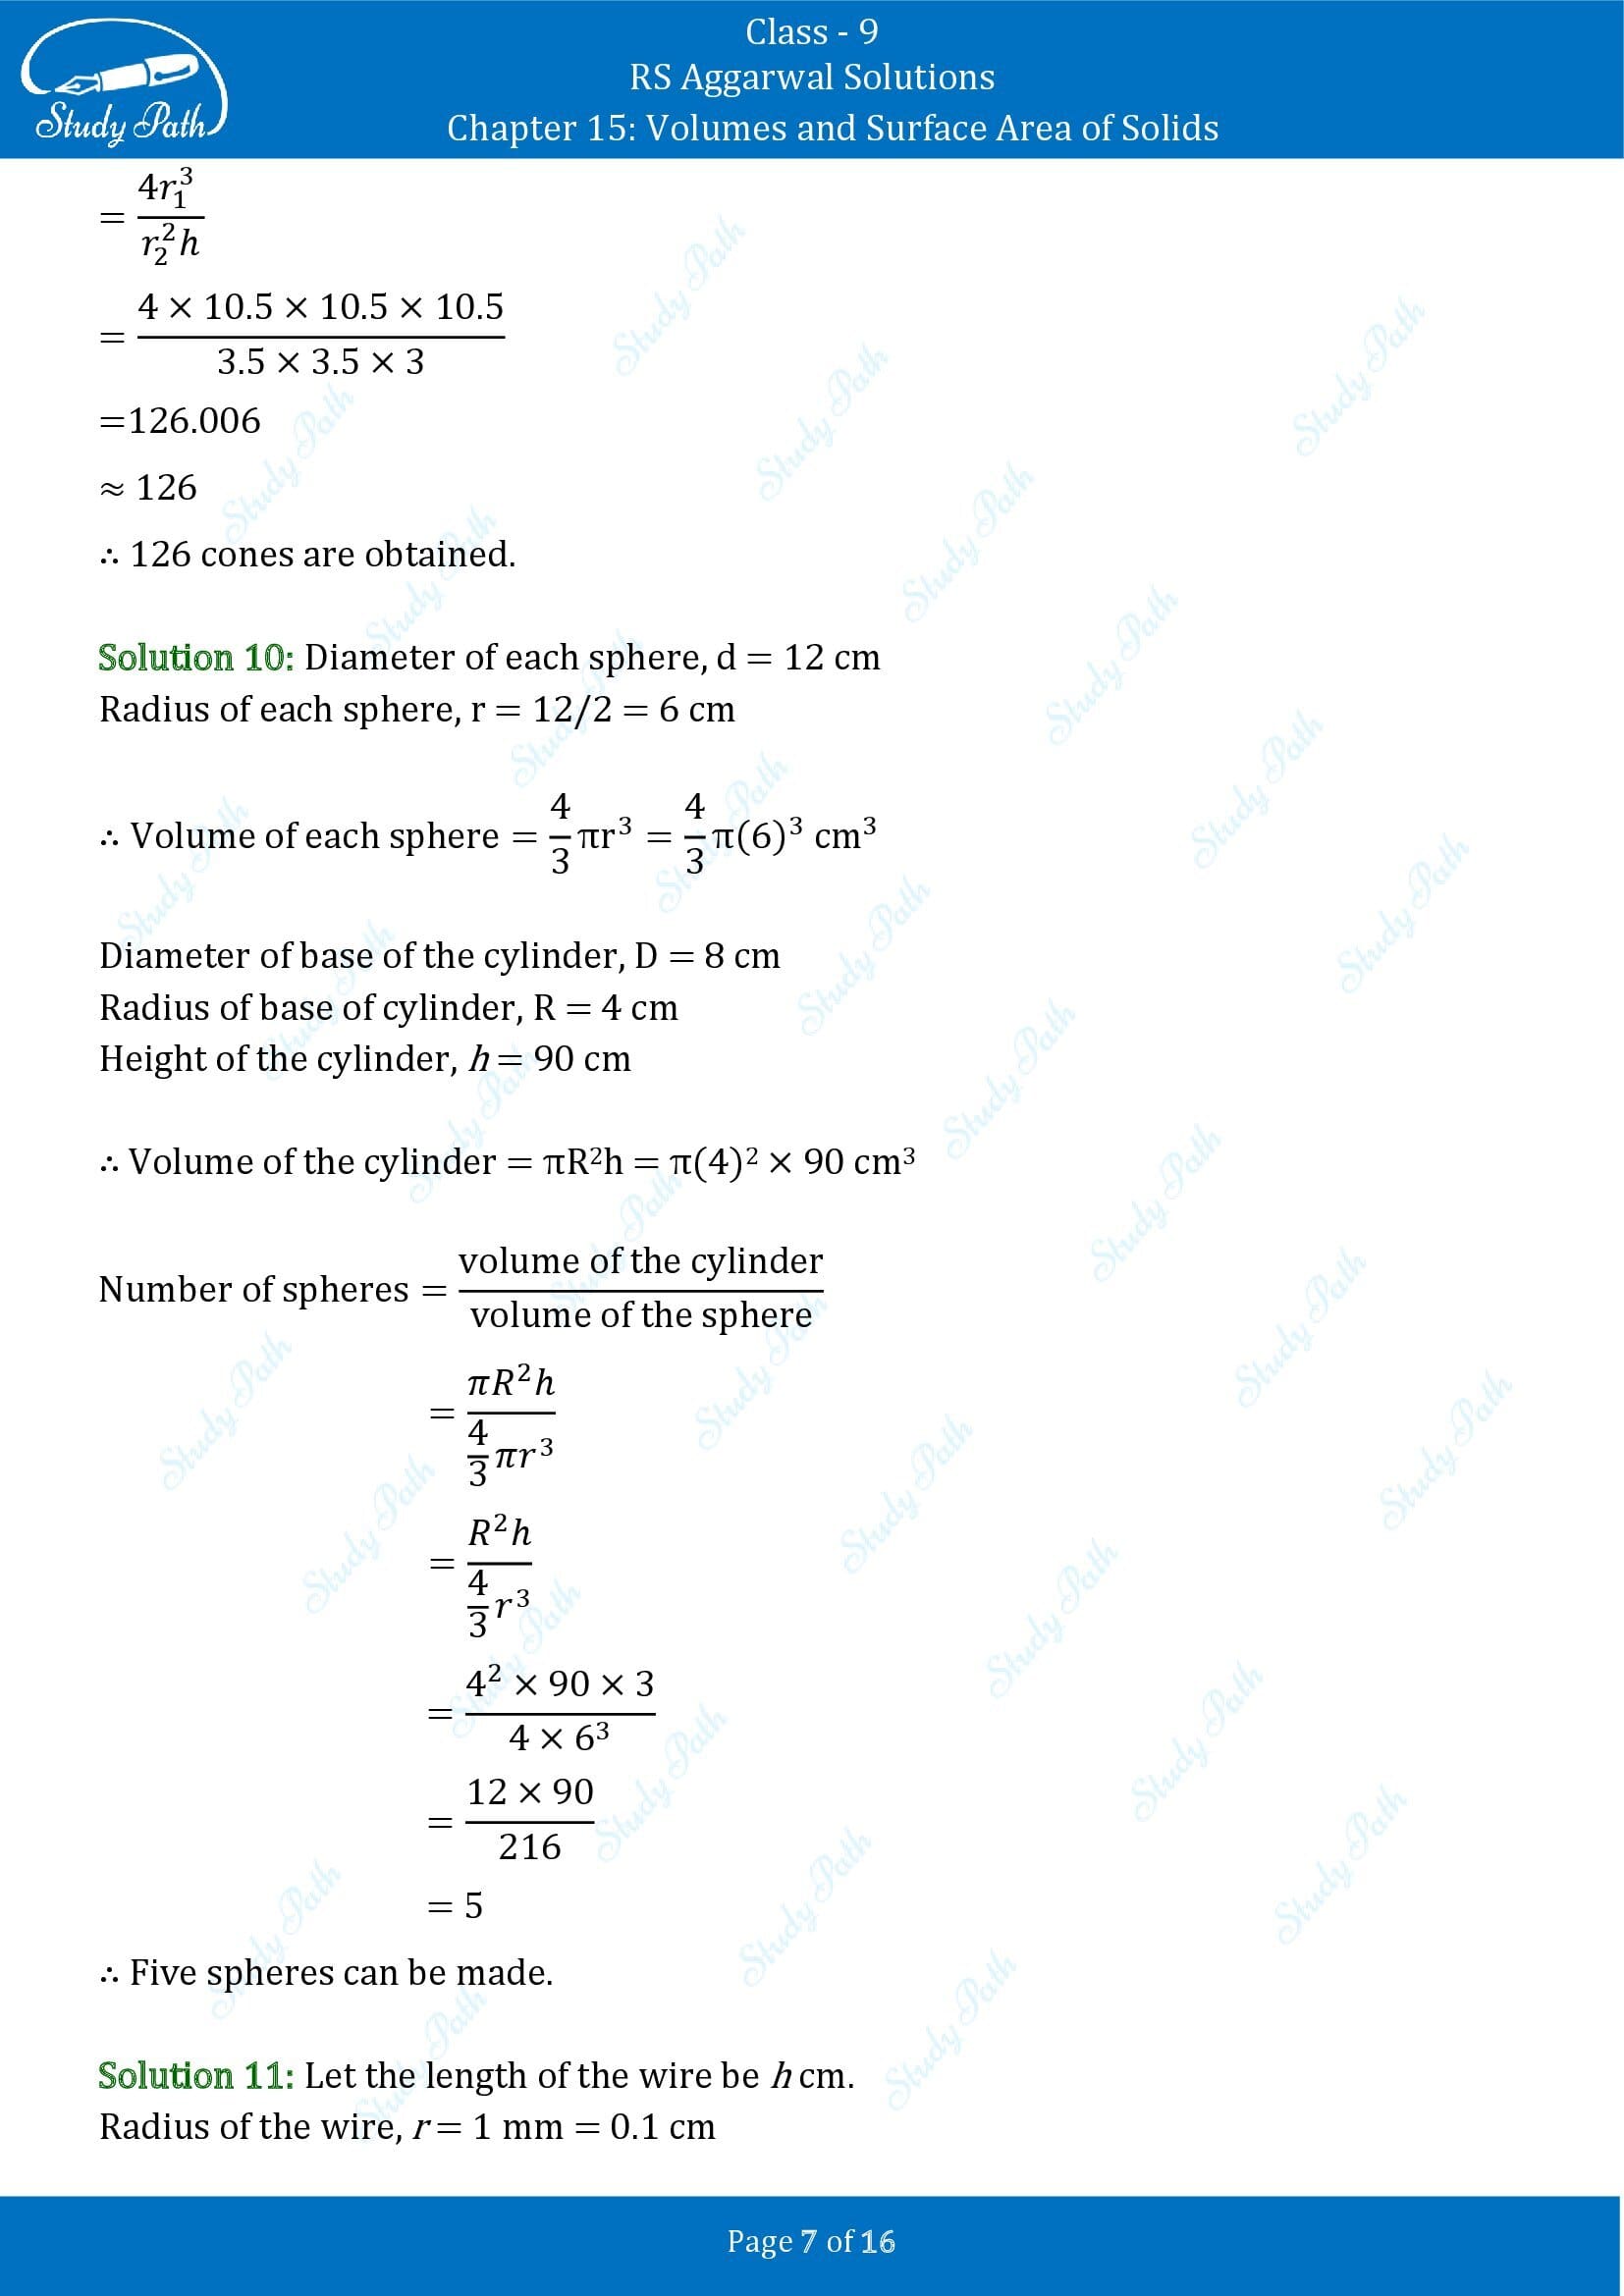 RS Aggarwal Solutions Class 9 Chapter 15 Volumes and Surface Area of Solids Exercise 15D 00007